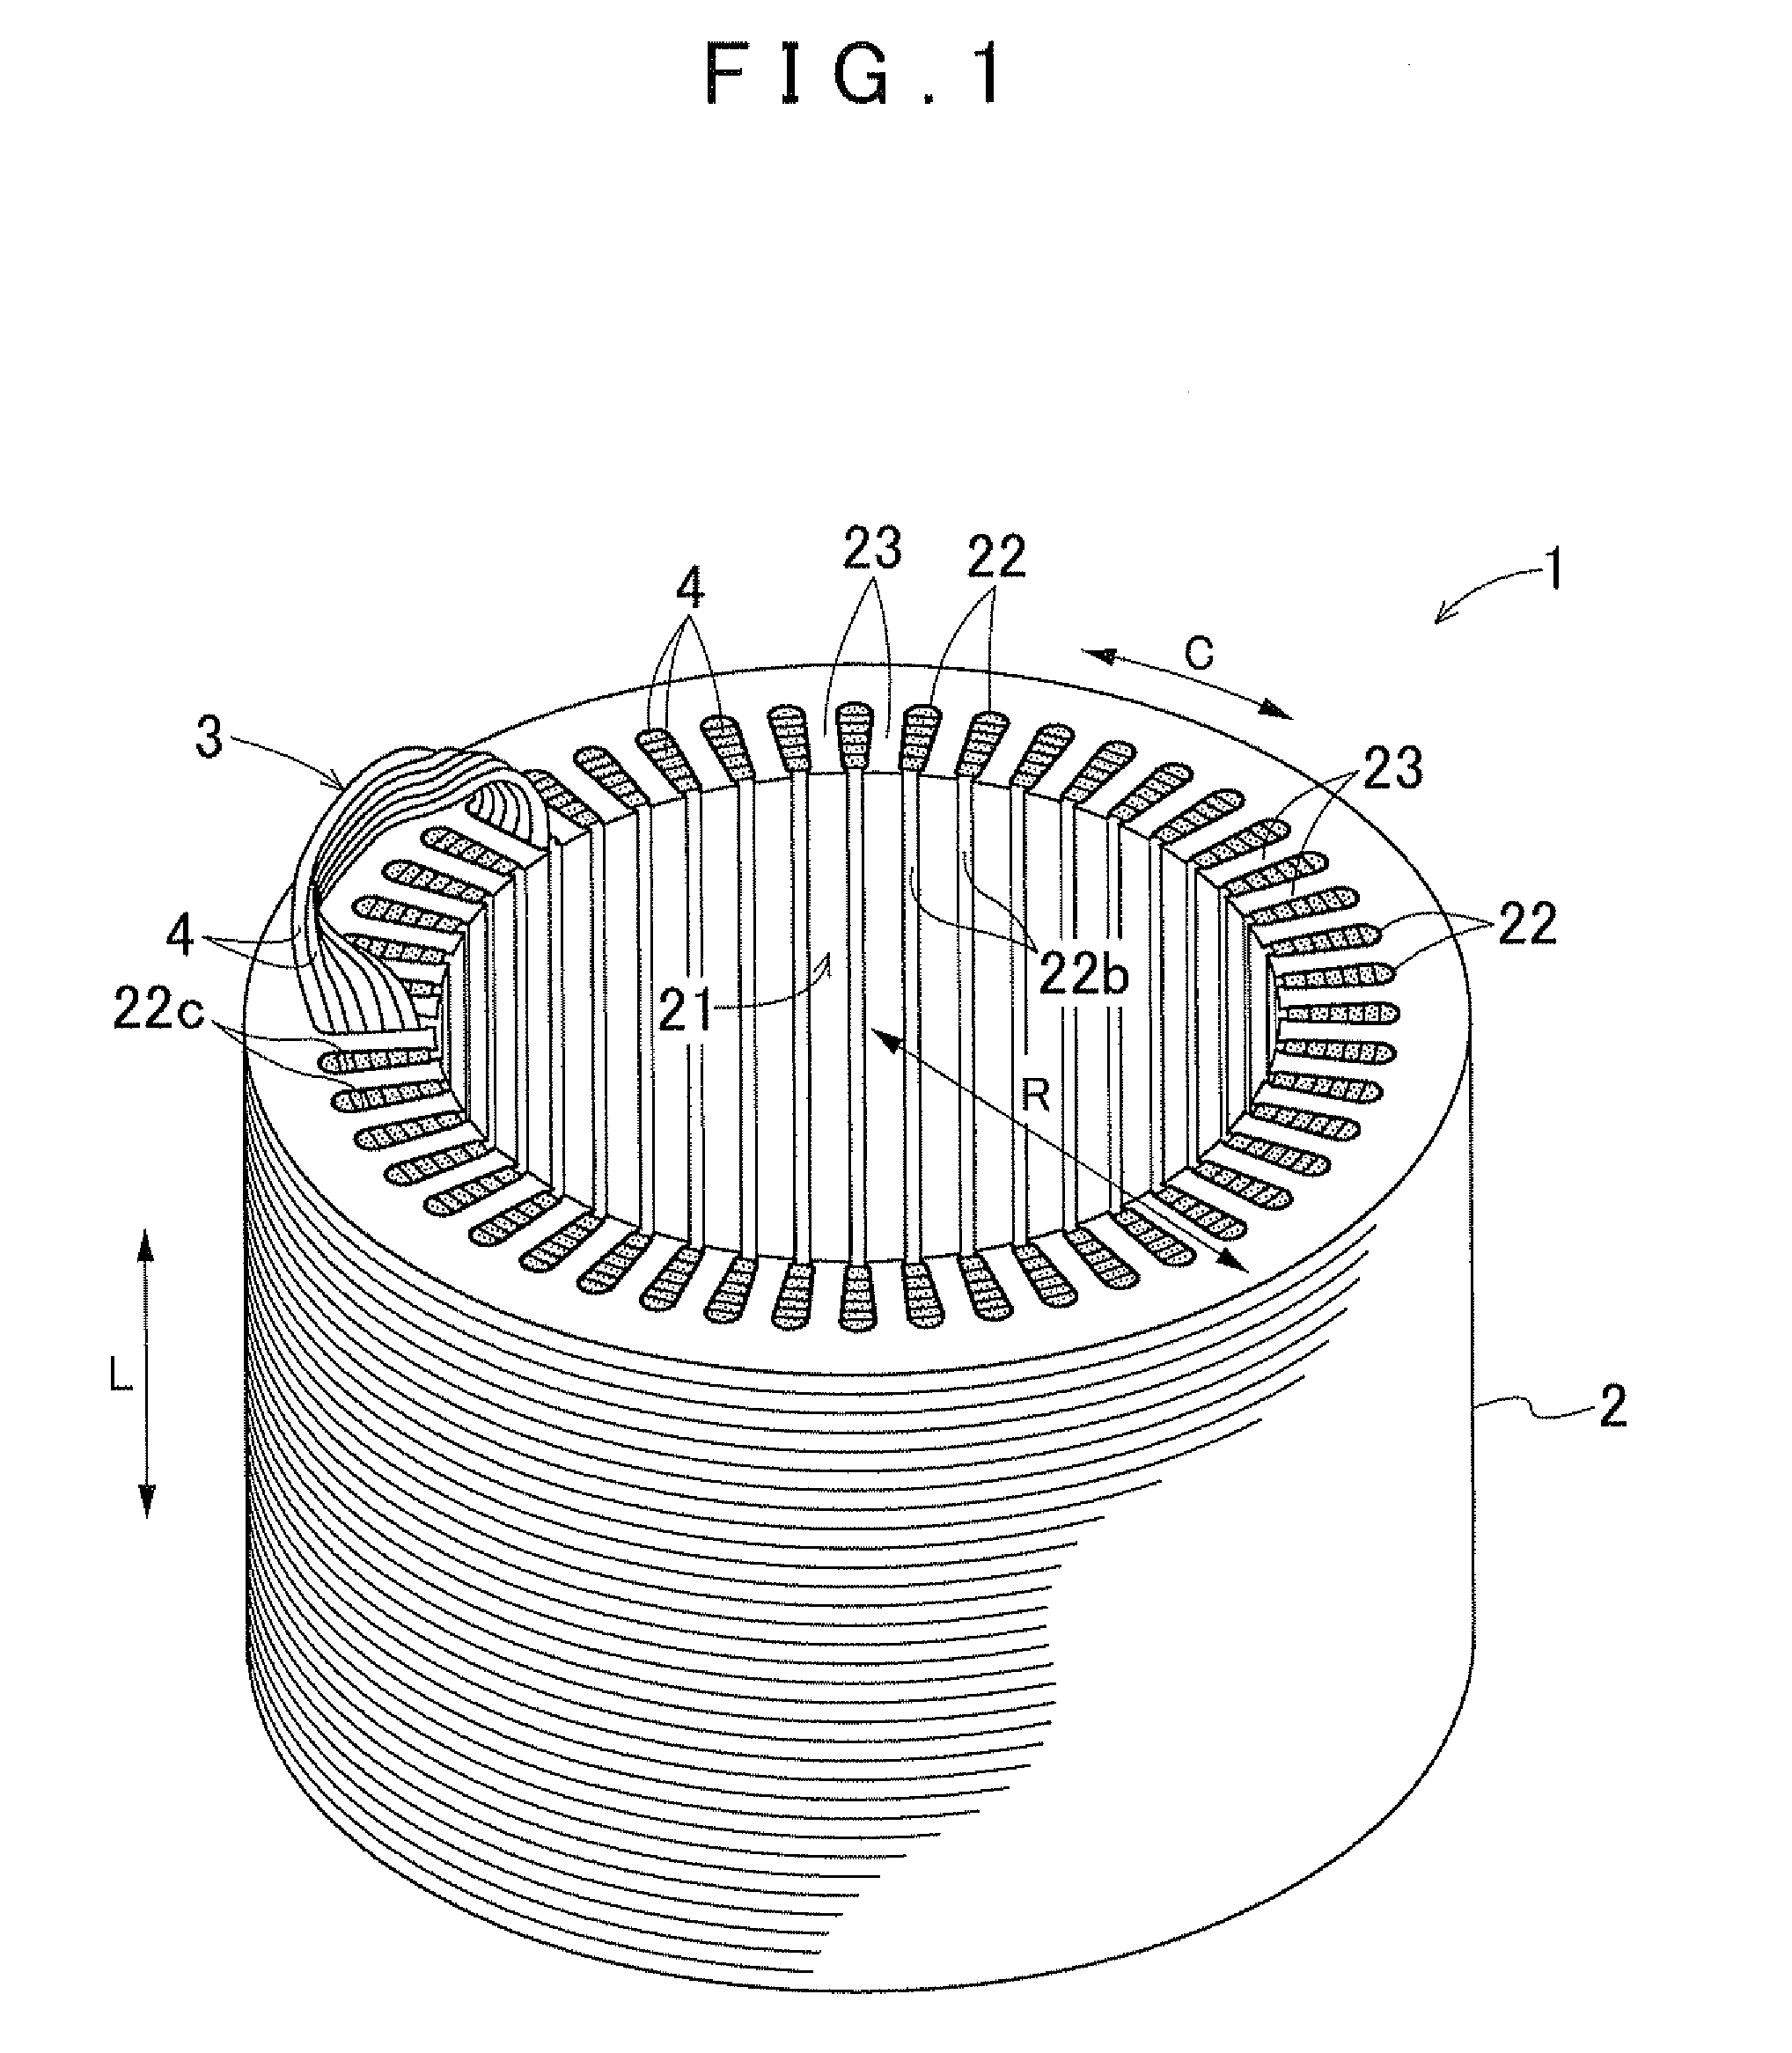 Stator for rotating electrical machine